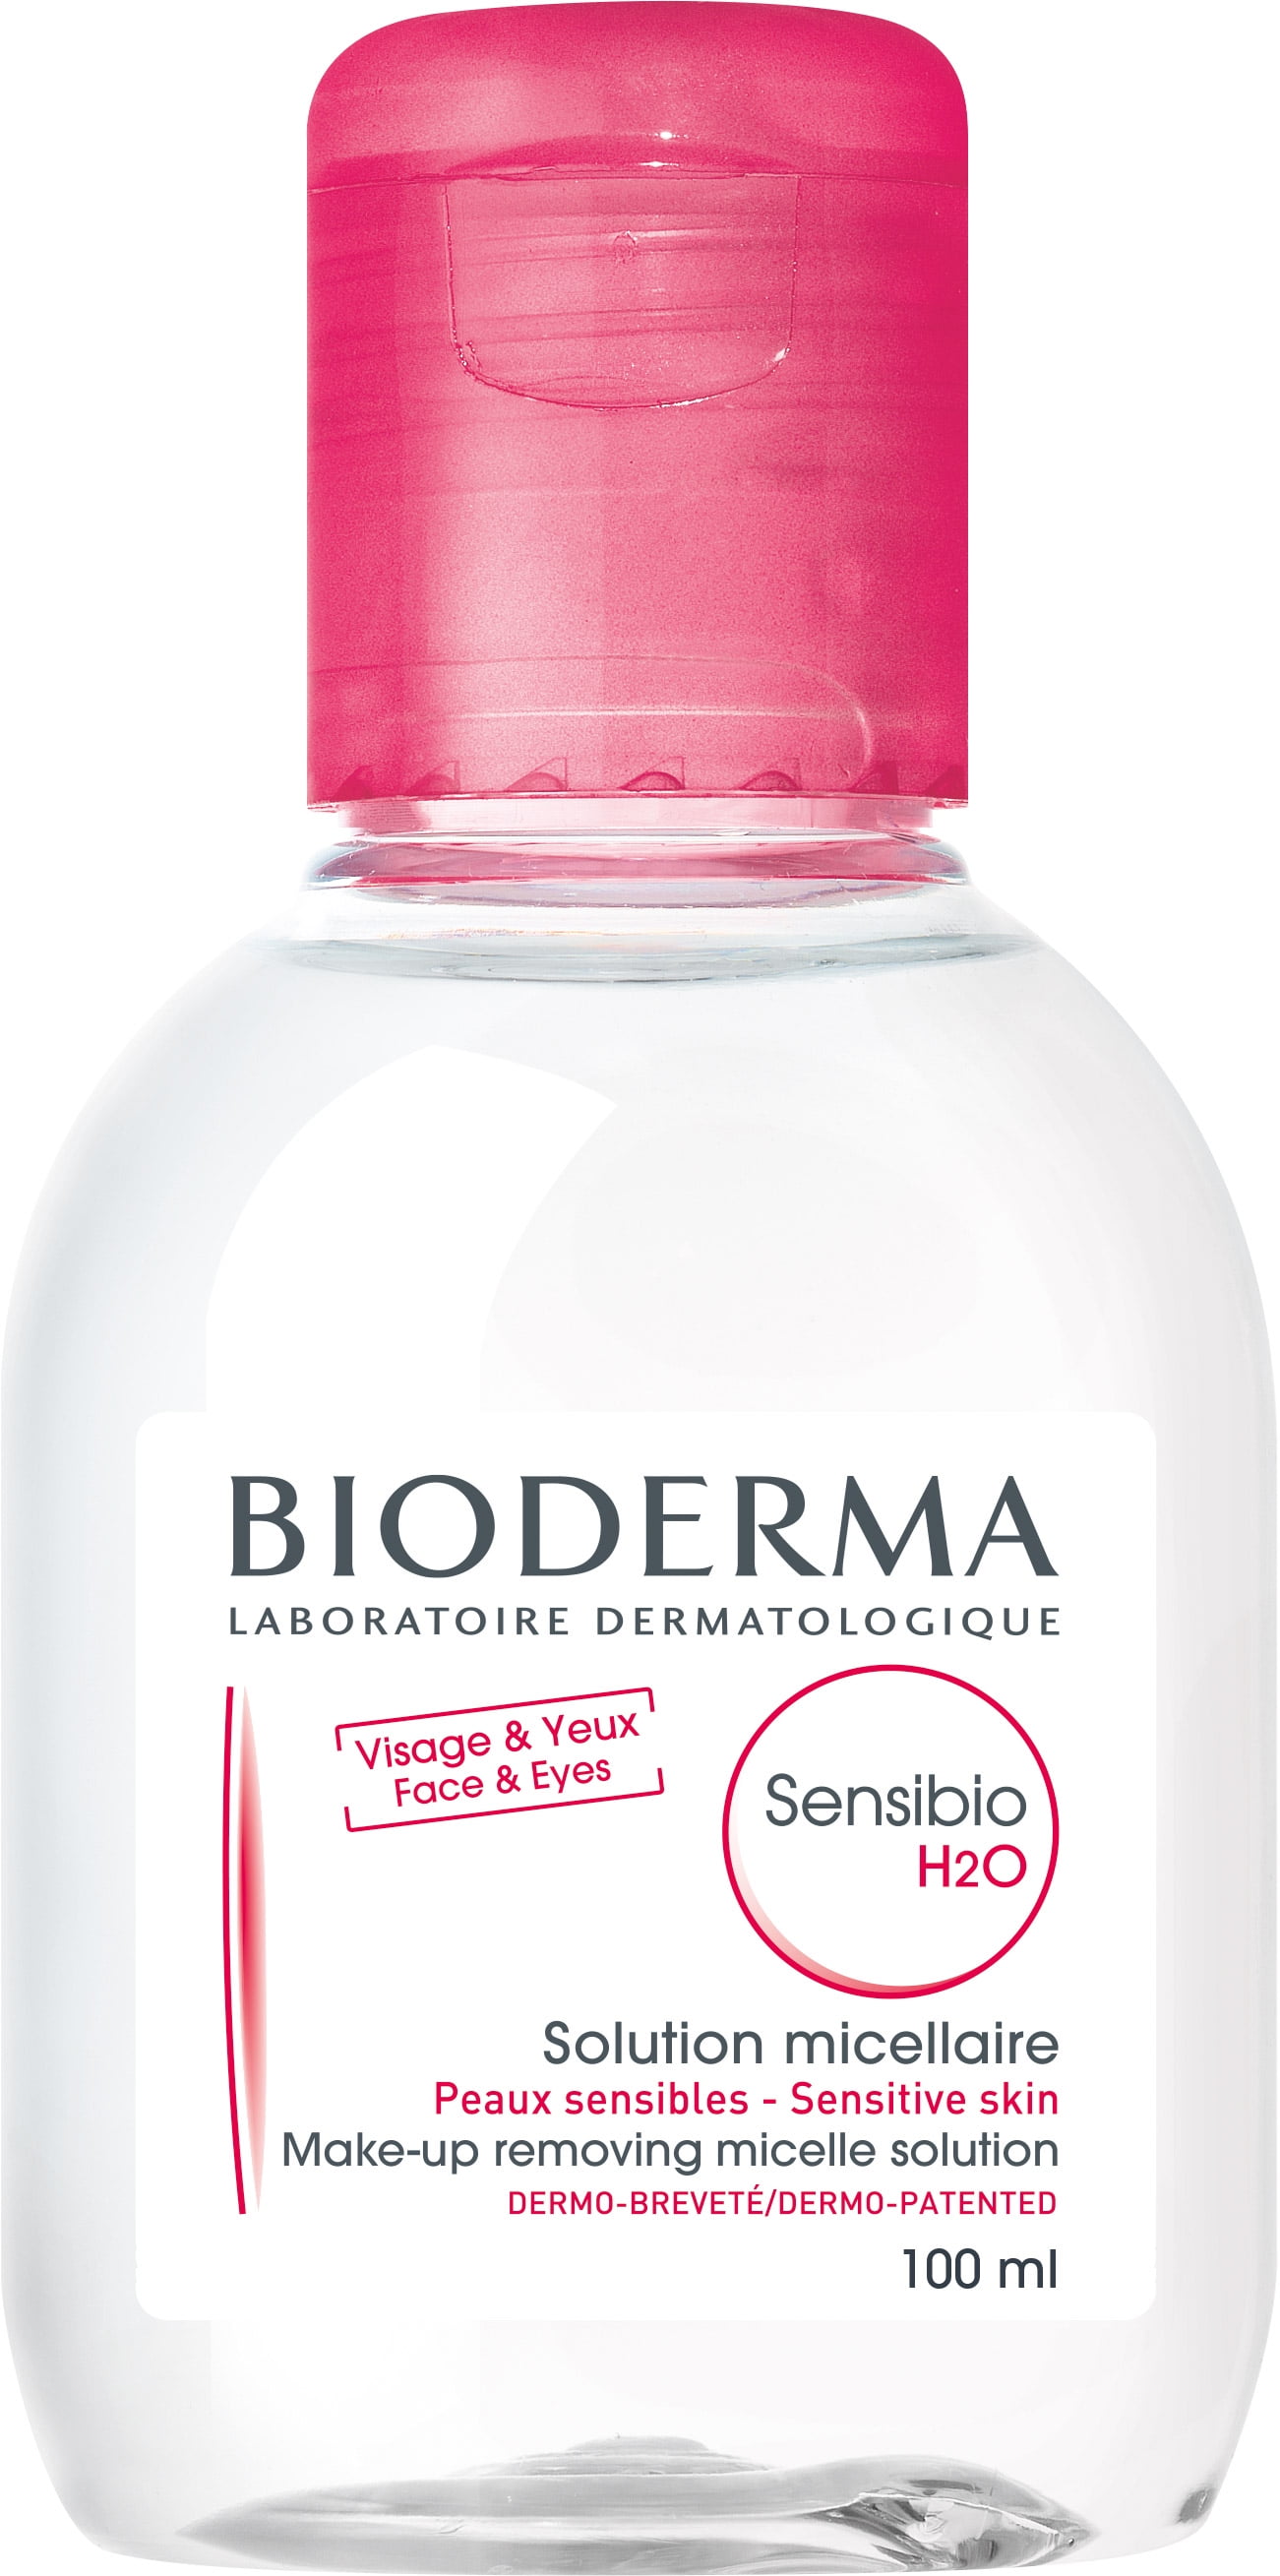 Bioderma Sensibio H2O Soothing Micellar Cleansing Water and Makeup Removing  Solution for Sensitive Skin - Face and Eyes - 3.33 fl.oz.